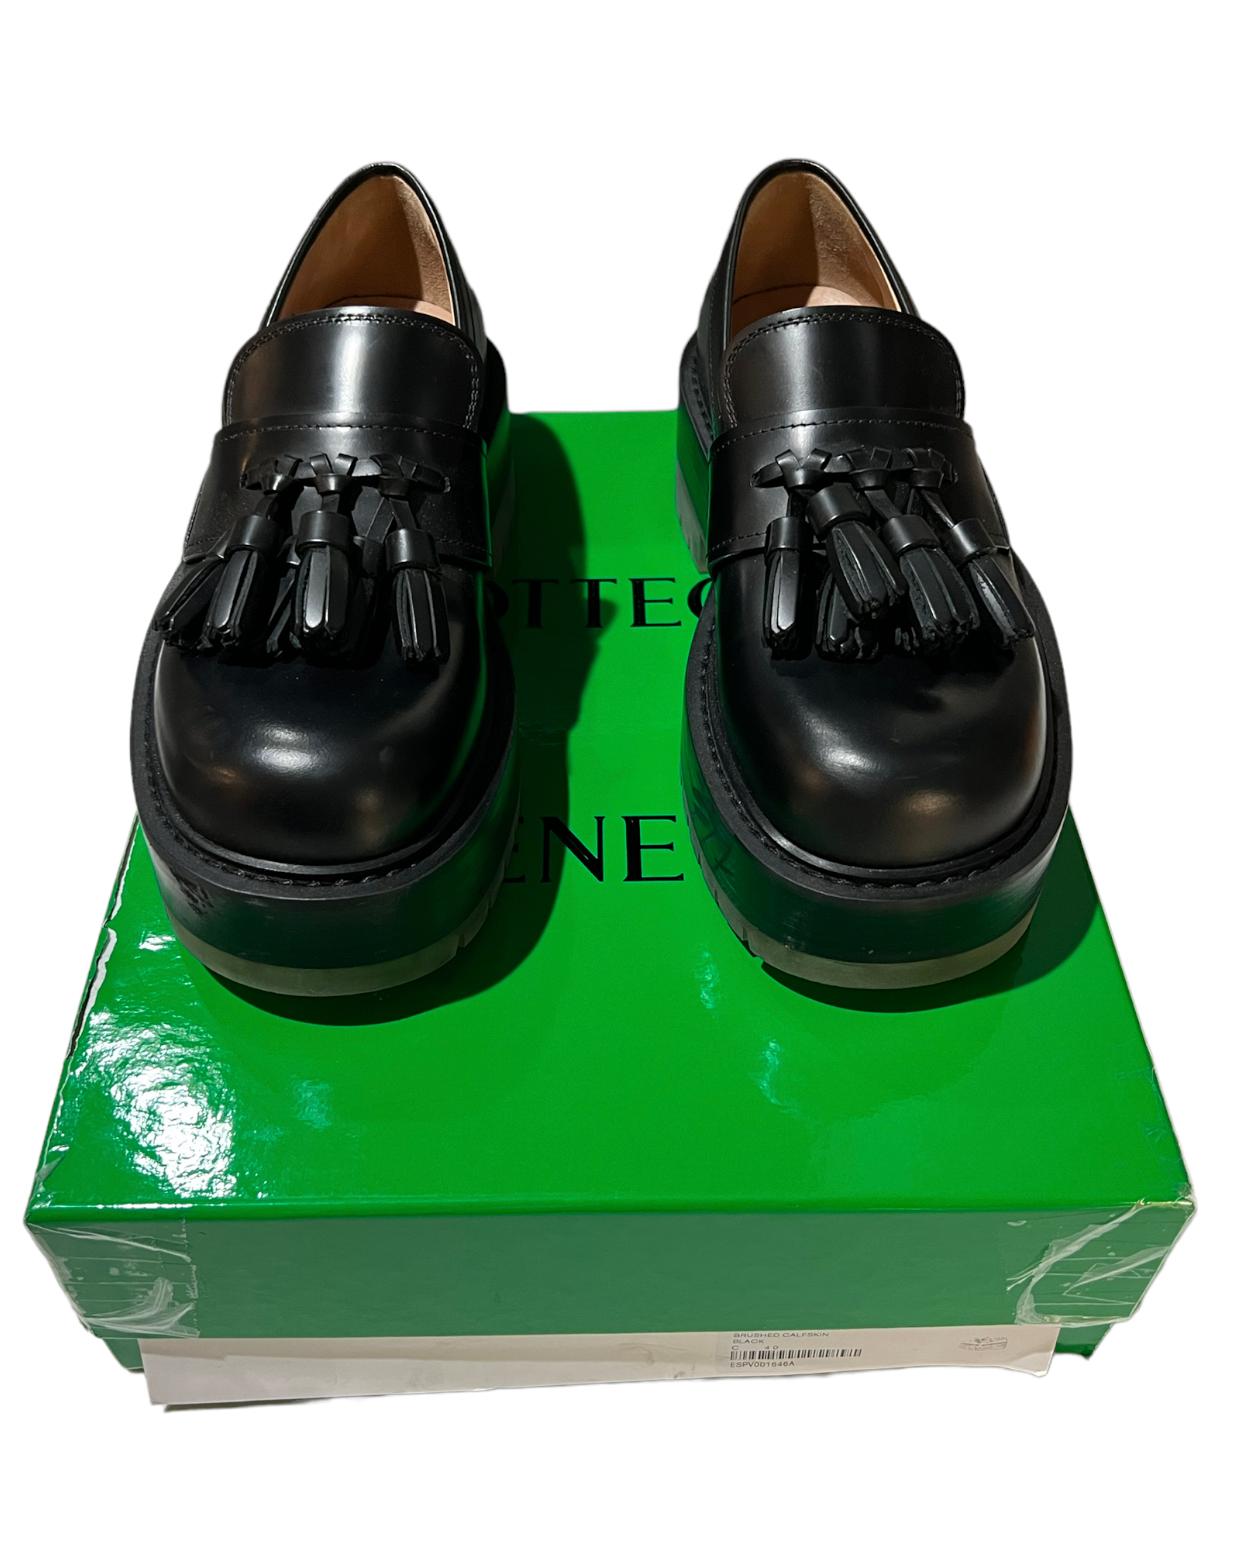 - Tassel detail
- Round toe
- Rubber platform
- Comes with the box 